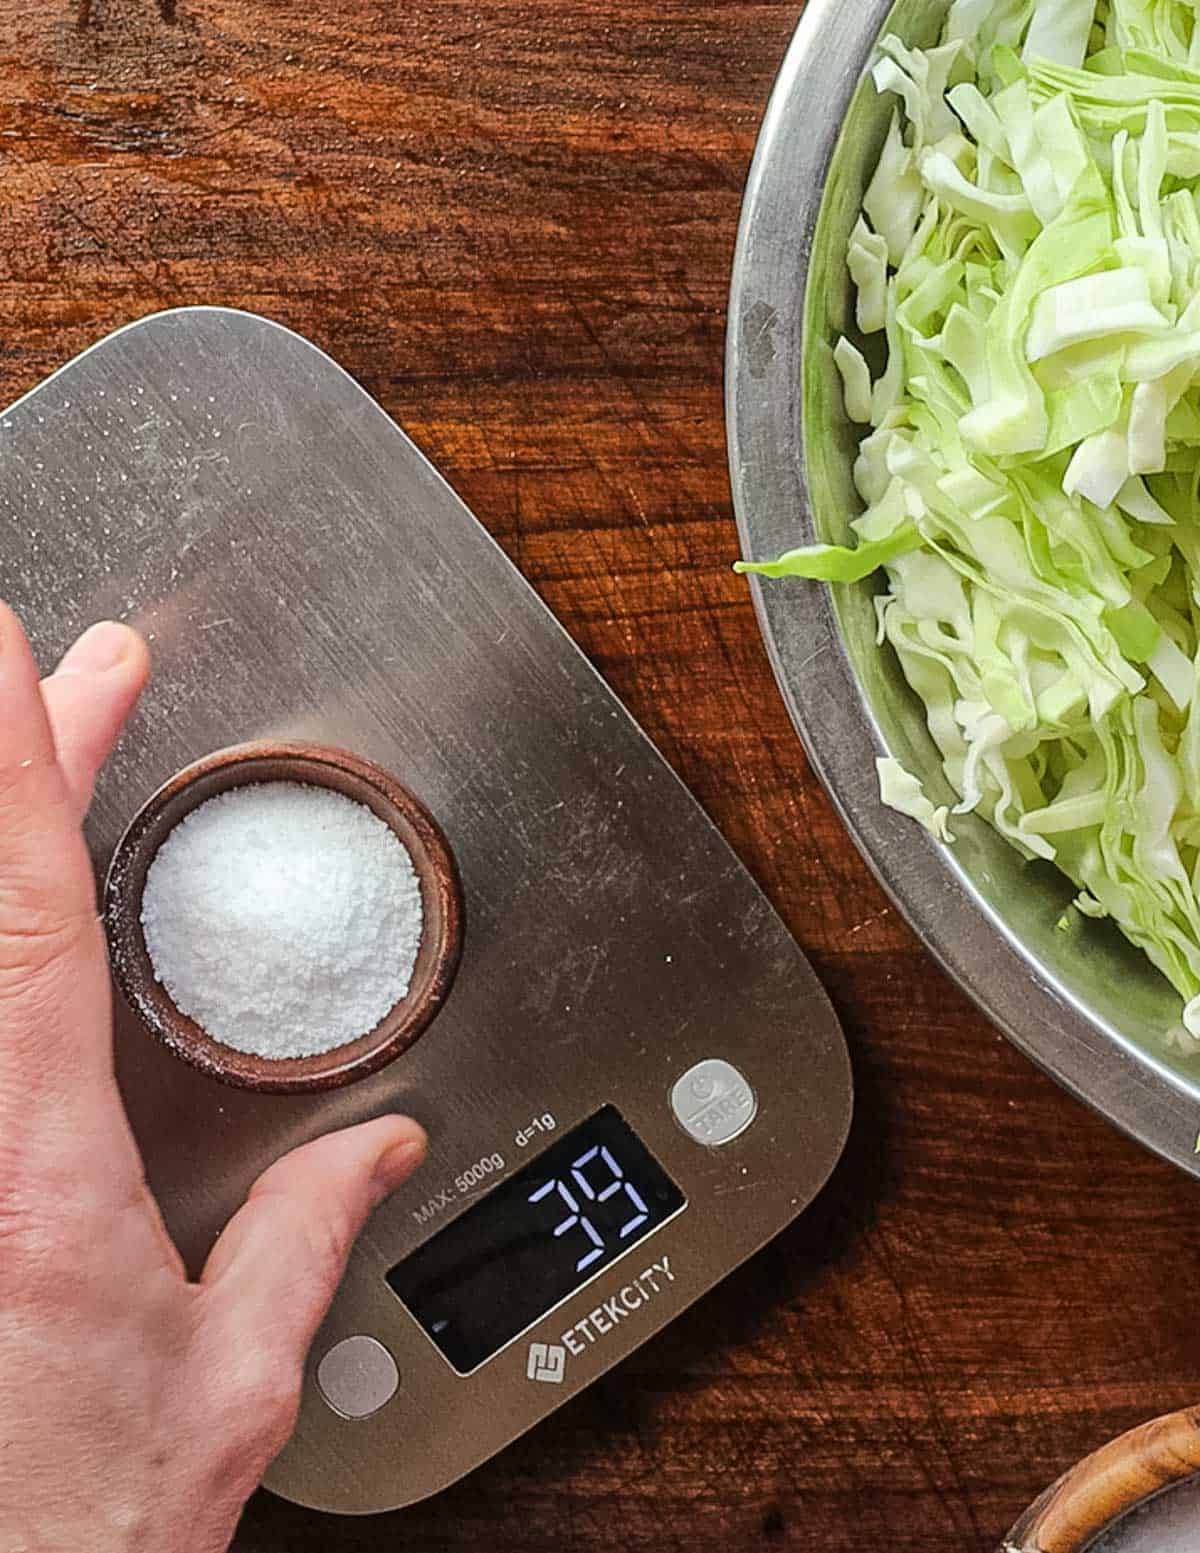 Weighing out the correct amount of salt for sauerkraut using a scale. 